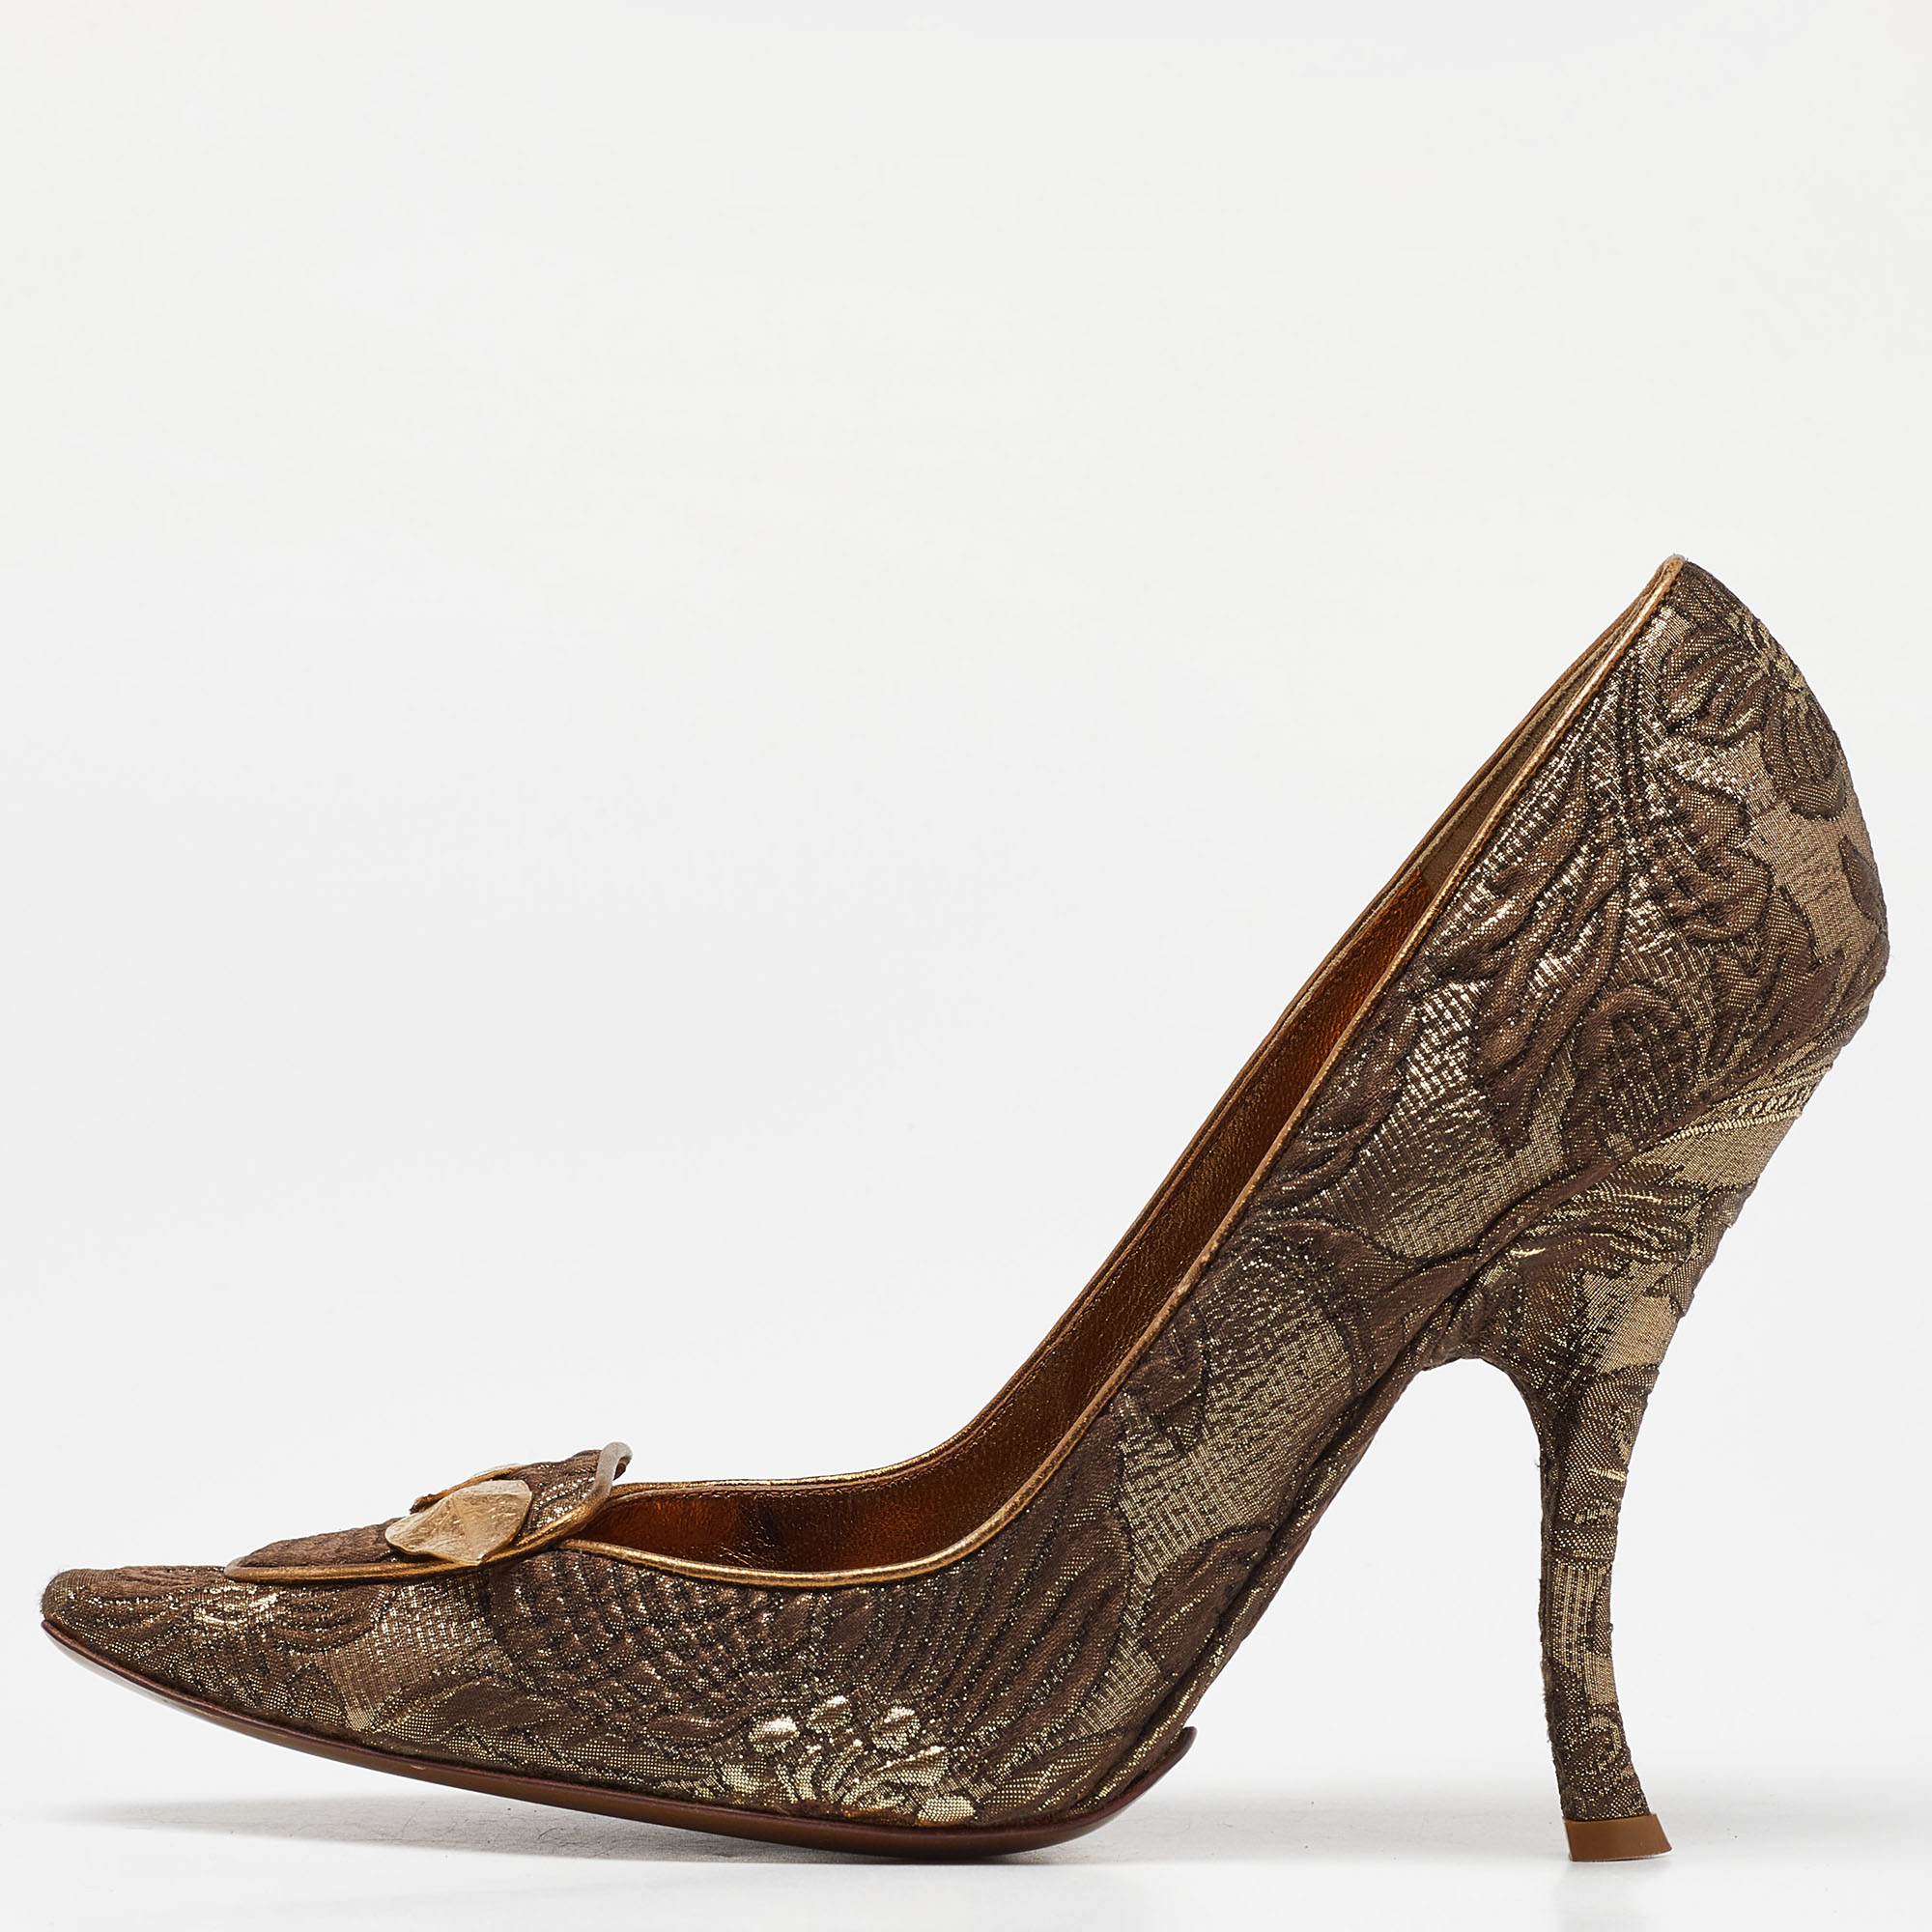 Dolce & gabbana brown/gold brocade fabric pointed toe  pumps size 39.5